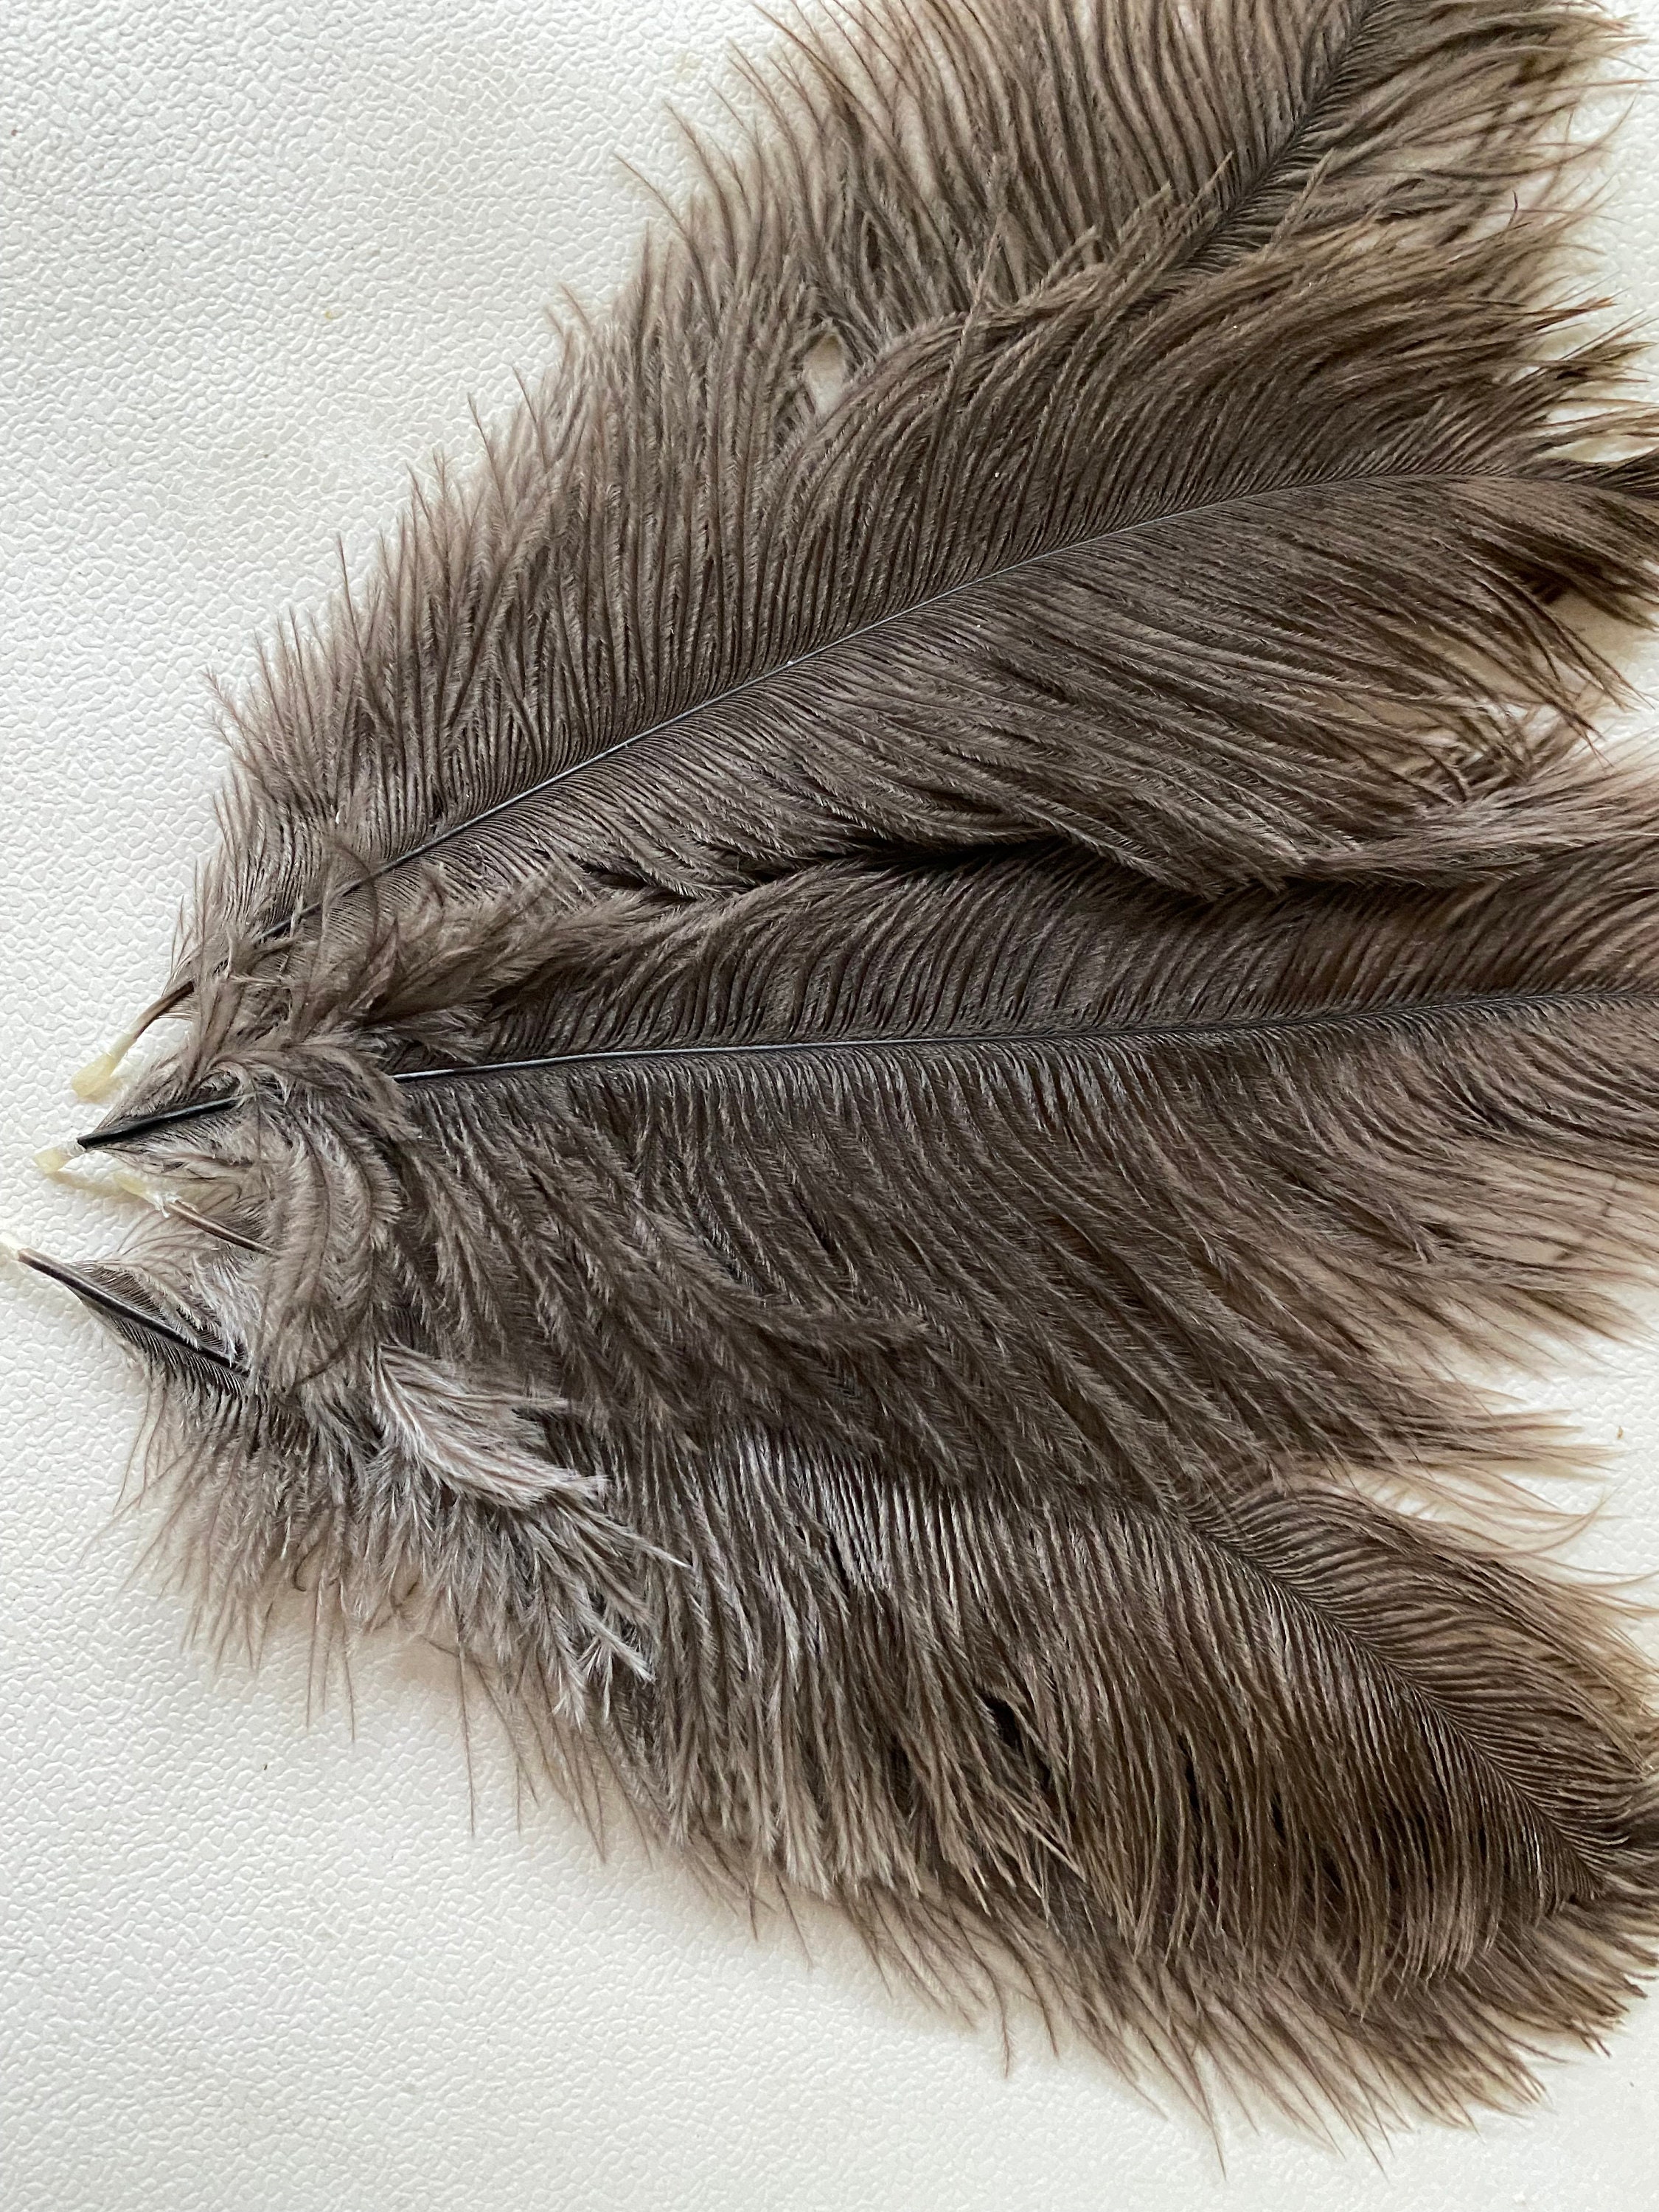 Buy Ostrich Feathers 13-16 NATURAL Undyed for Feather Centerpieces